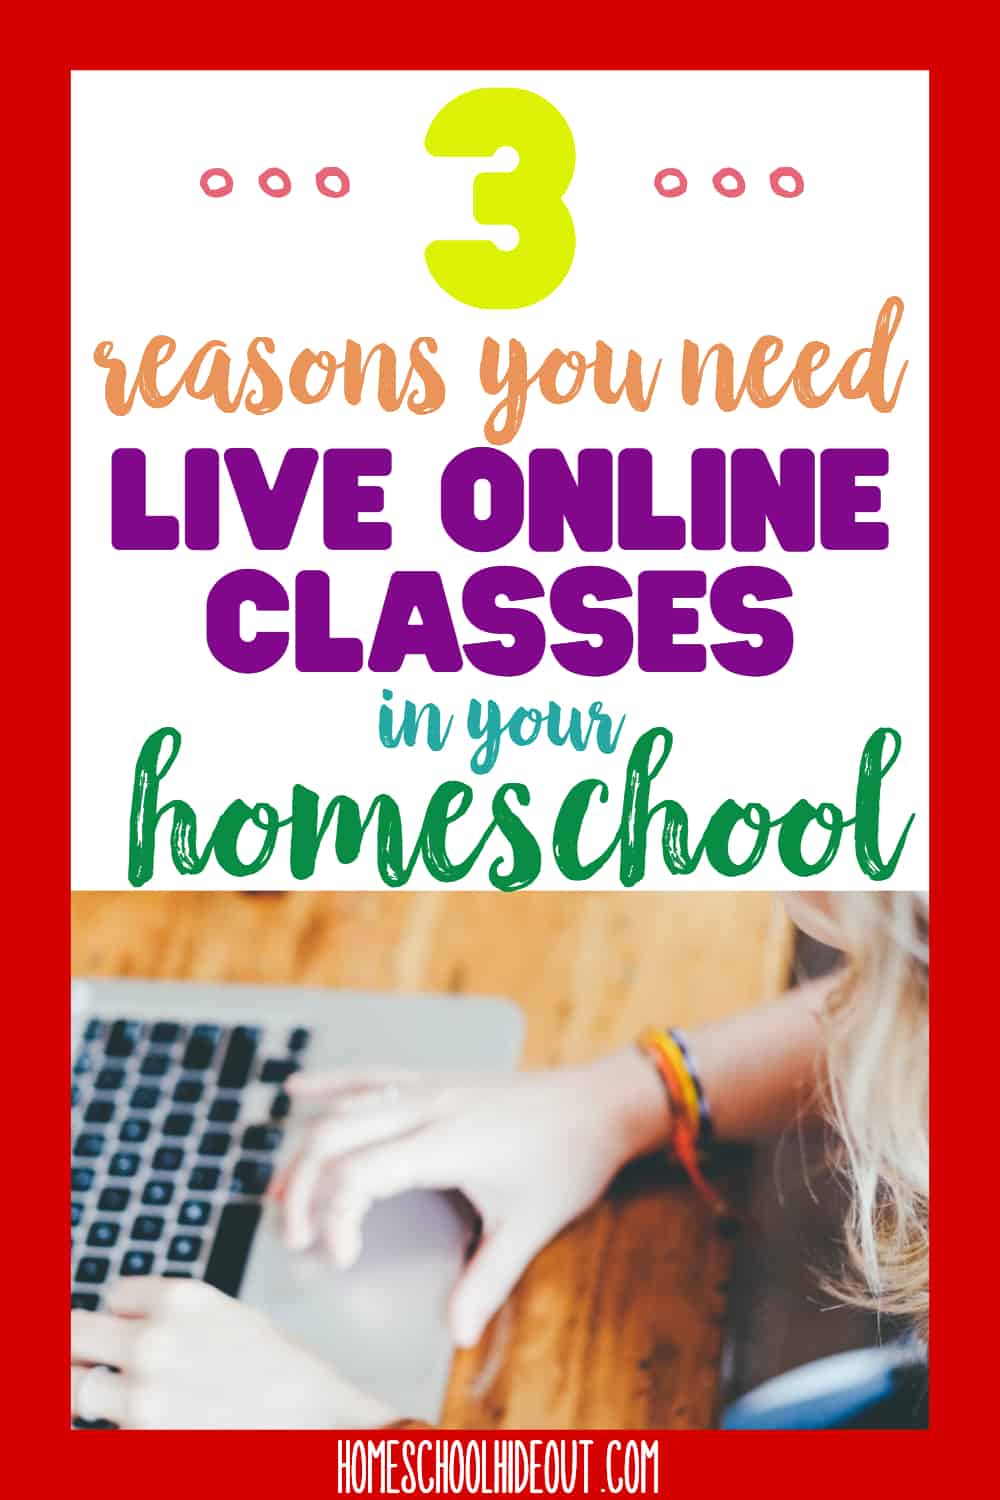 Live online classes for homeschoolers can take your year from drab to fab! We LOVED the CSI class from Big River Academy. #homeschooling #liveclasses #onlineclasses